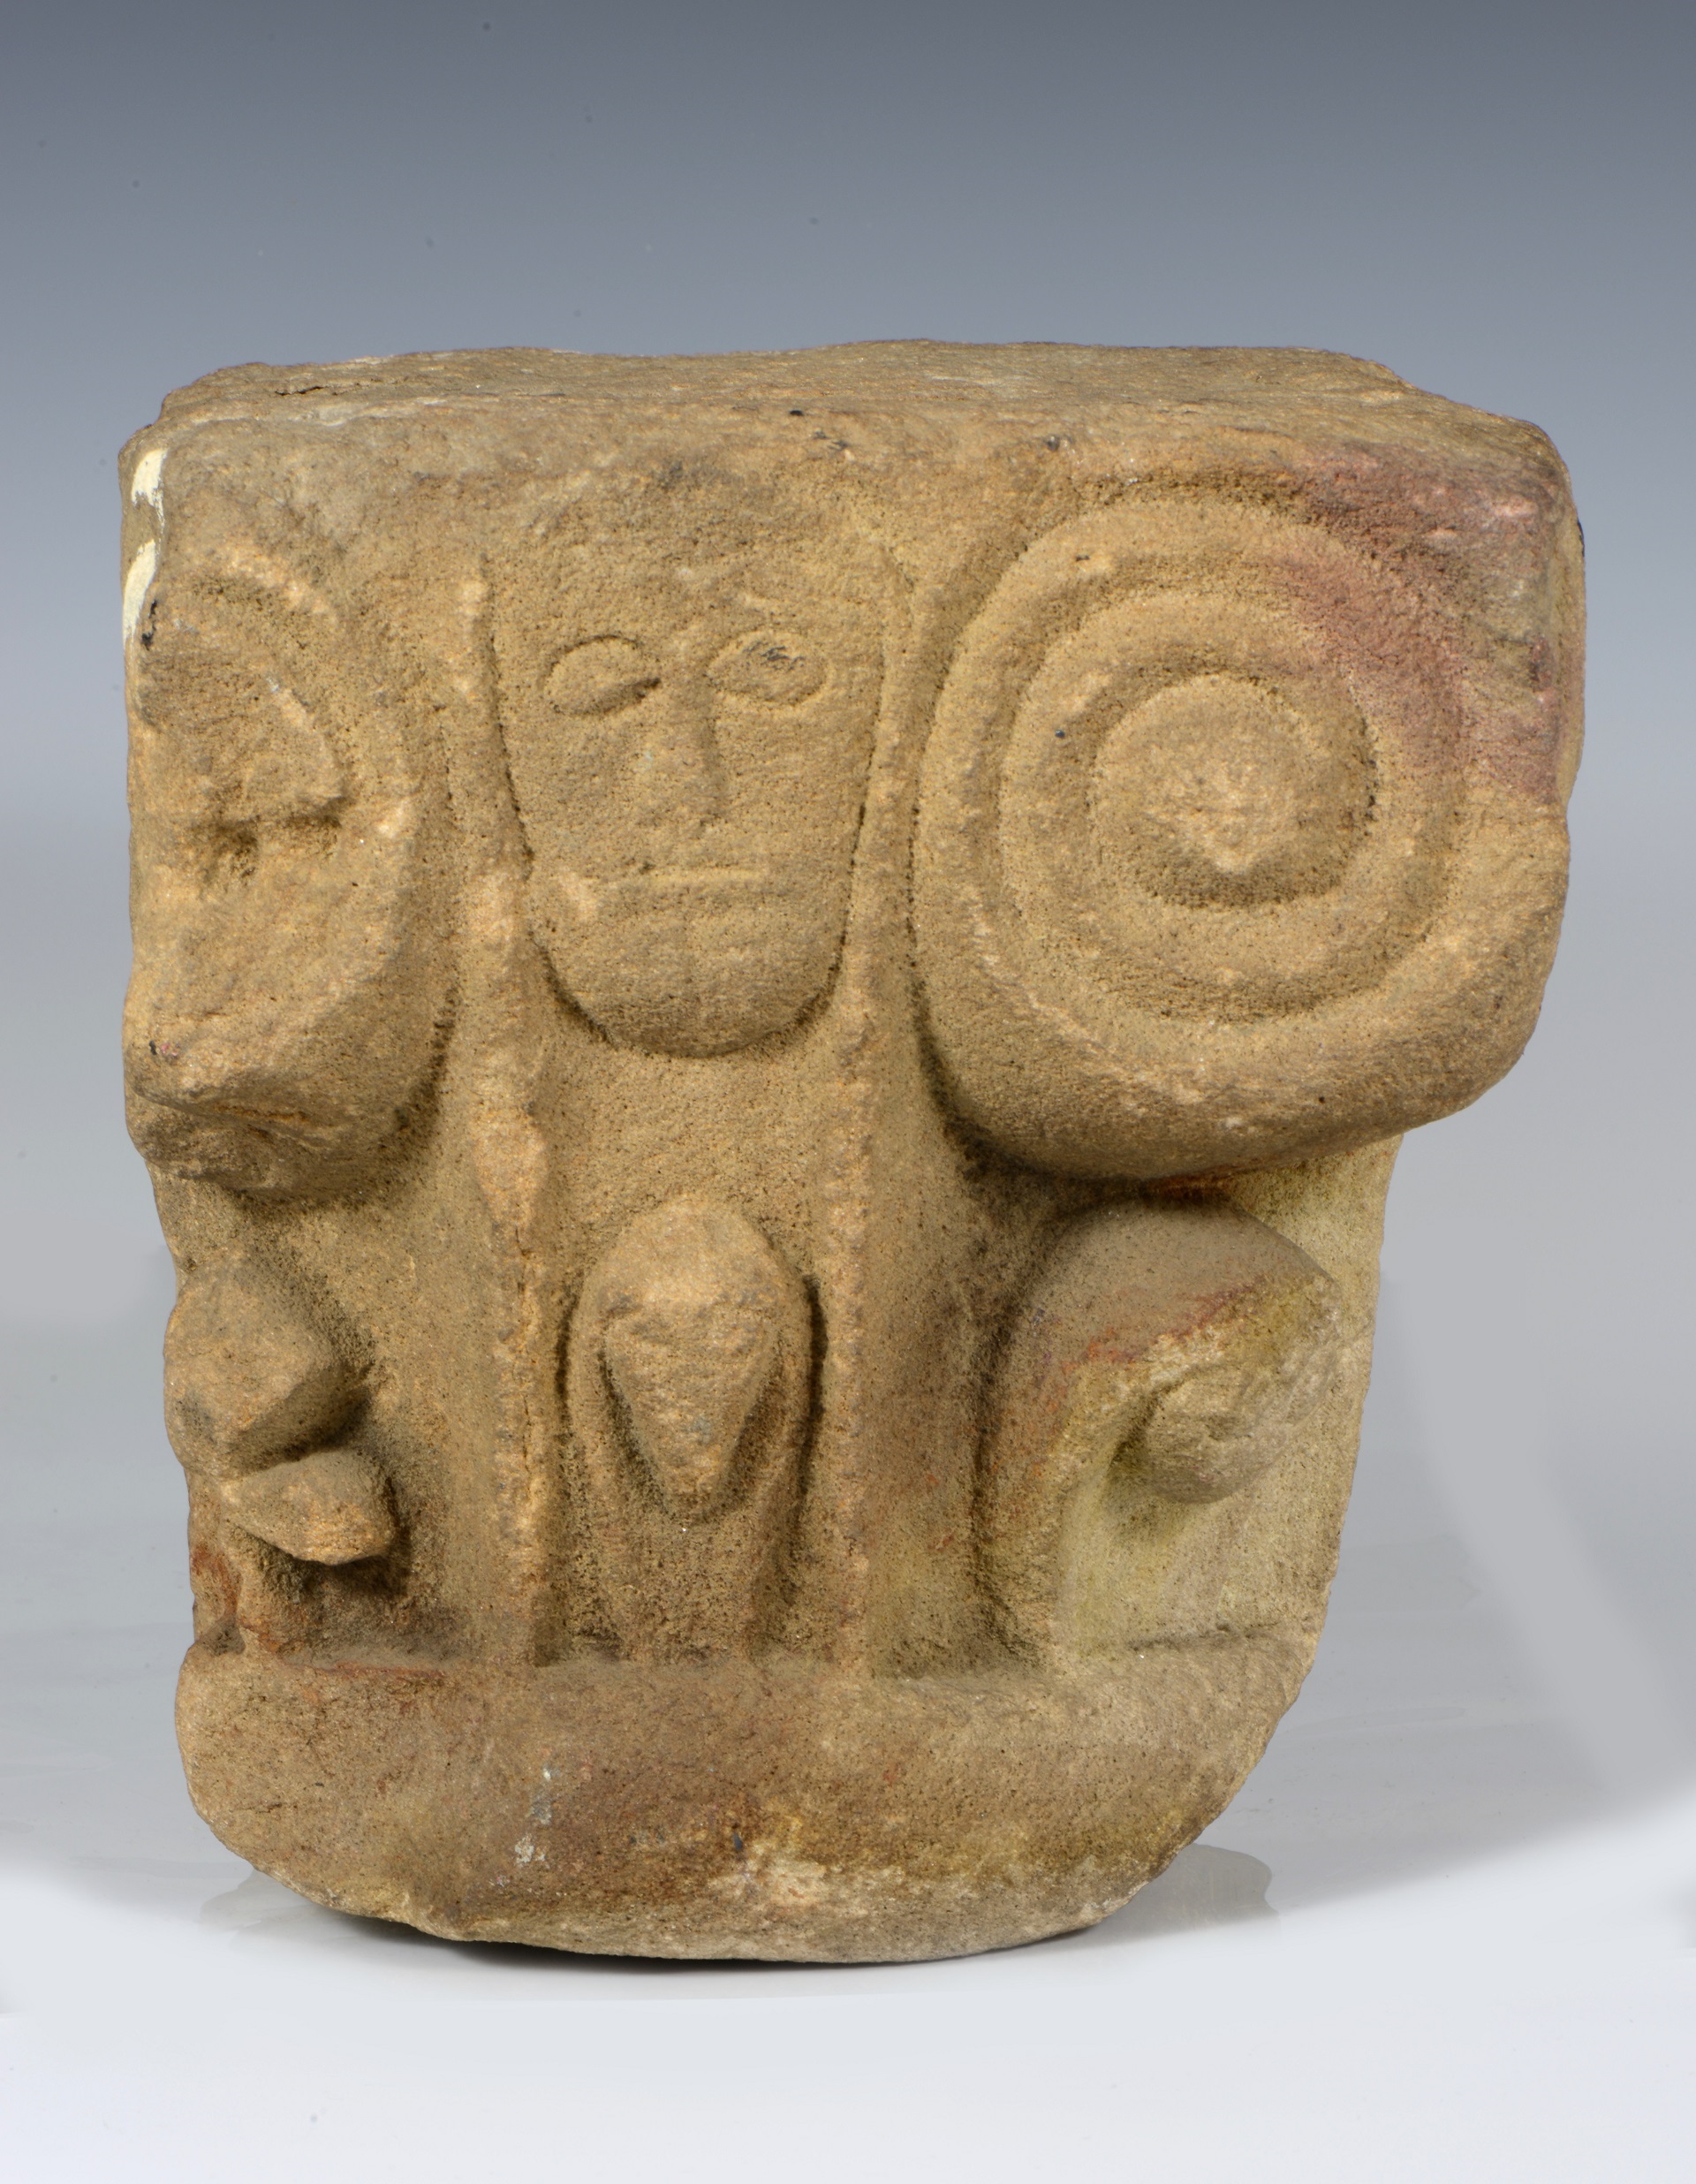 A piece of sandstone dating to the 12th century with carved decoration, including a face at the centre and scrolls on either side.